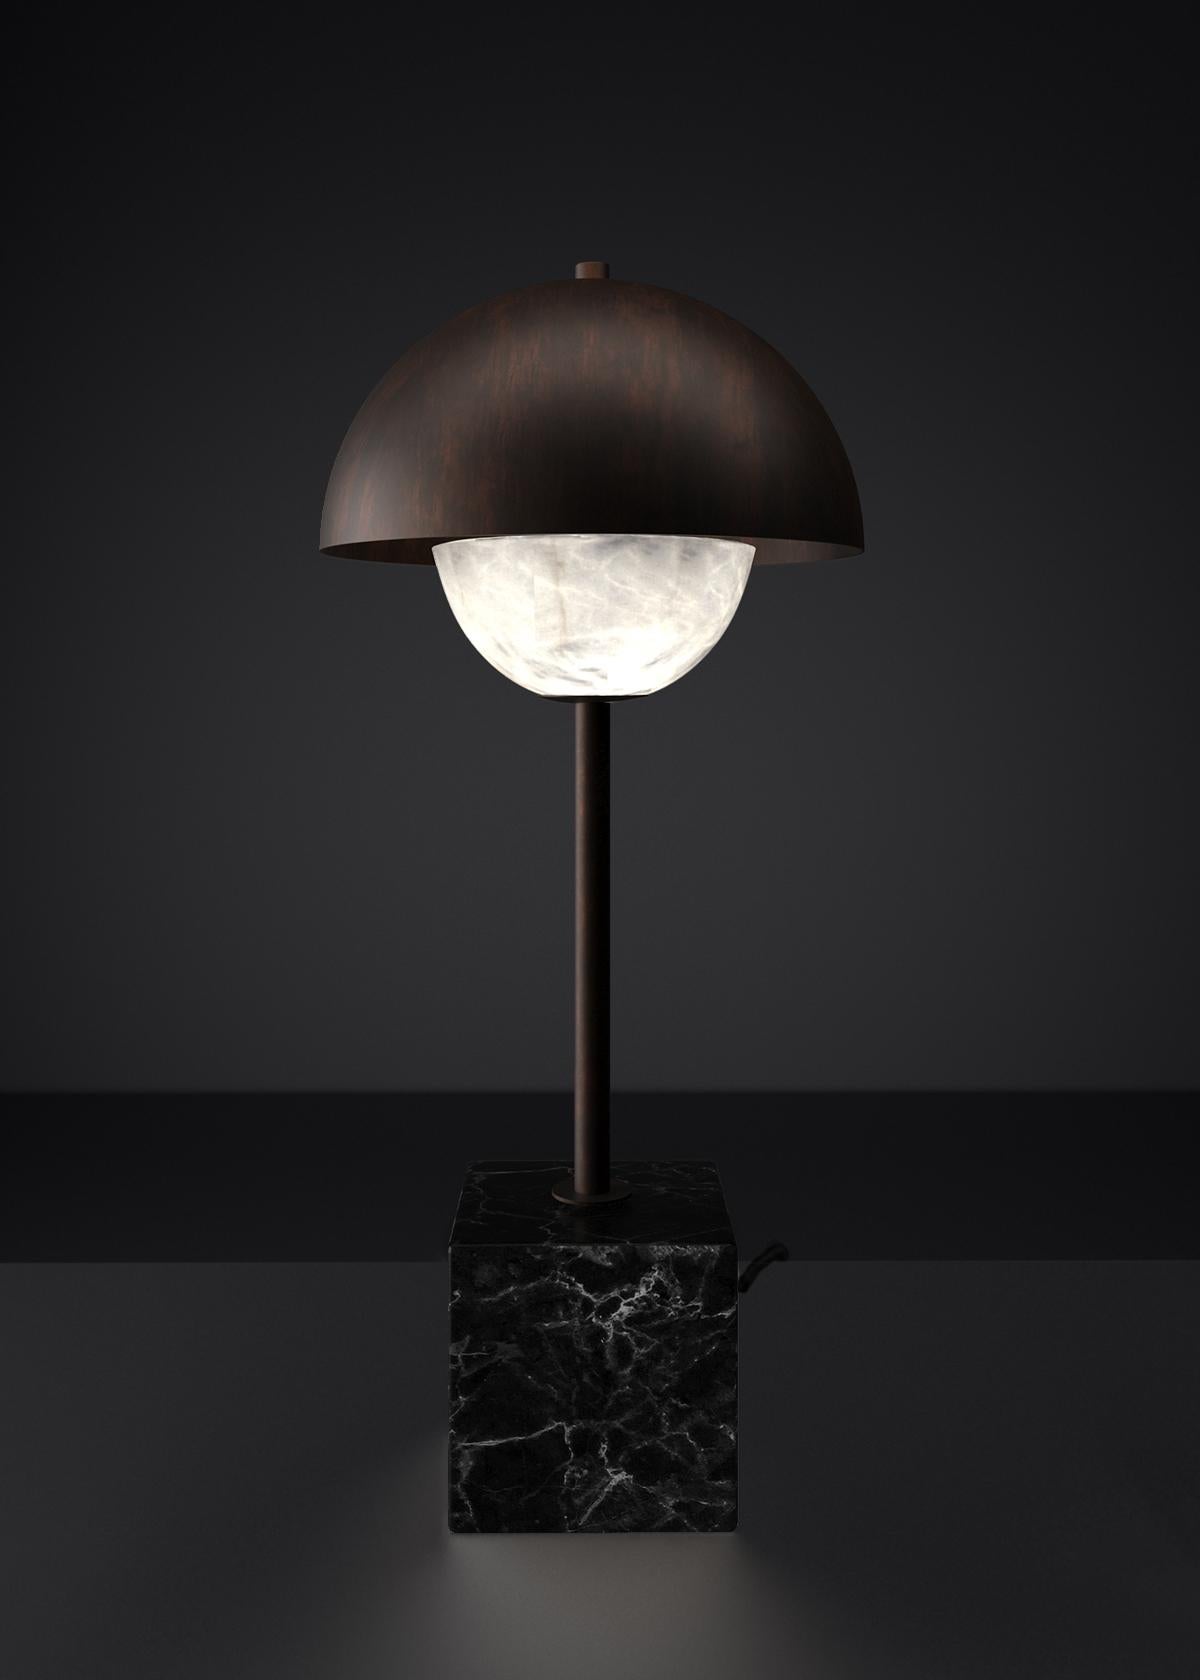 Apollo Ruggine Of Florence Metal Table Lamp by Alabastro Italiano
Dimensions: D 30 x W 30 x H 74 cm.
Materials: White alabaster, Nero Marquinia marble, black silk cables and metal.

Available in different finishes: Shiny Silver, Bronze, Brushed